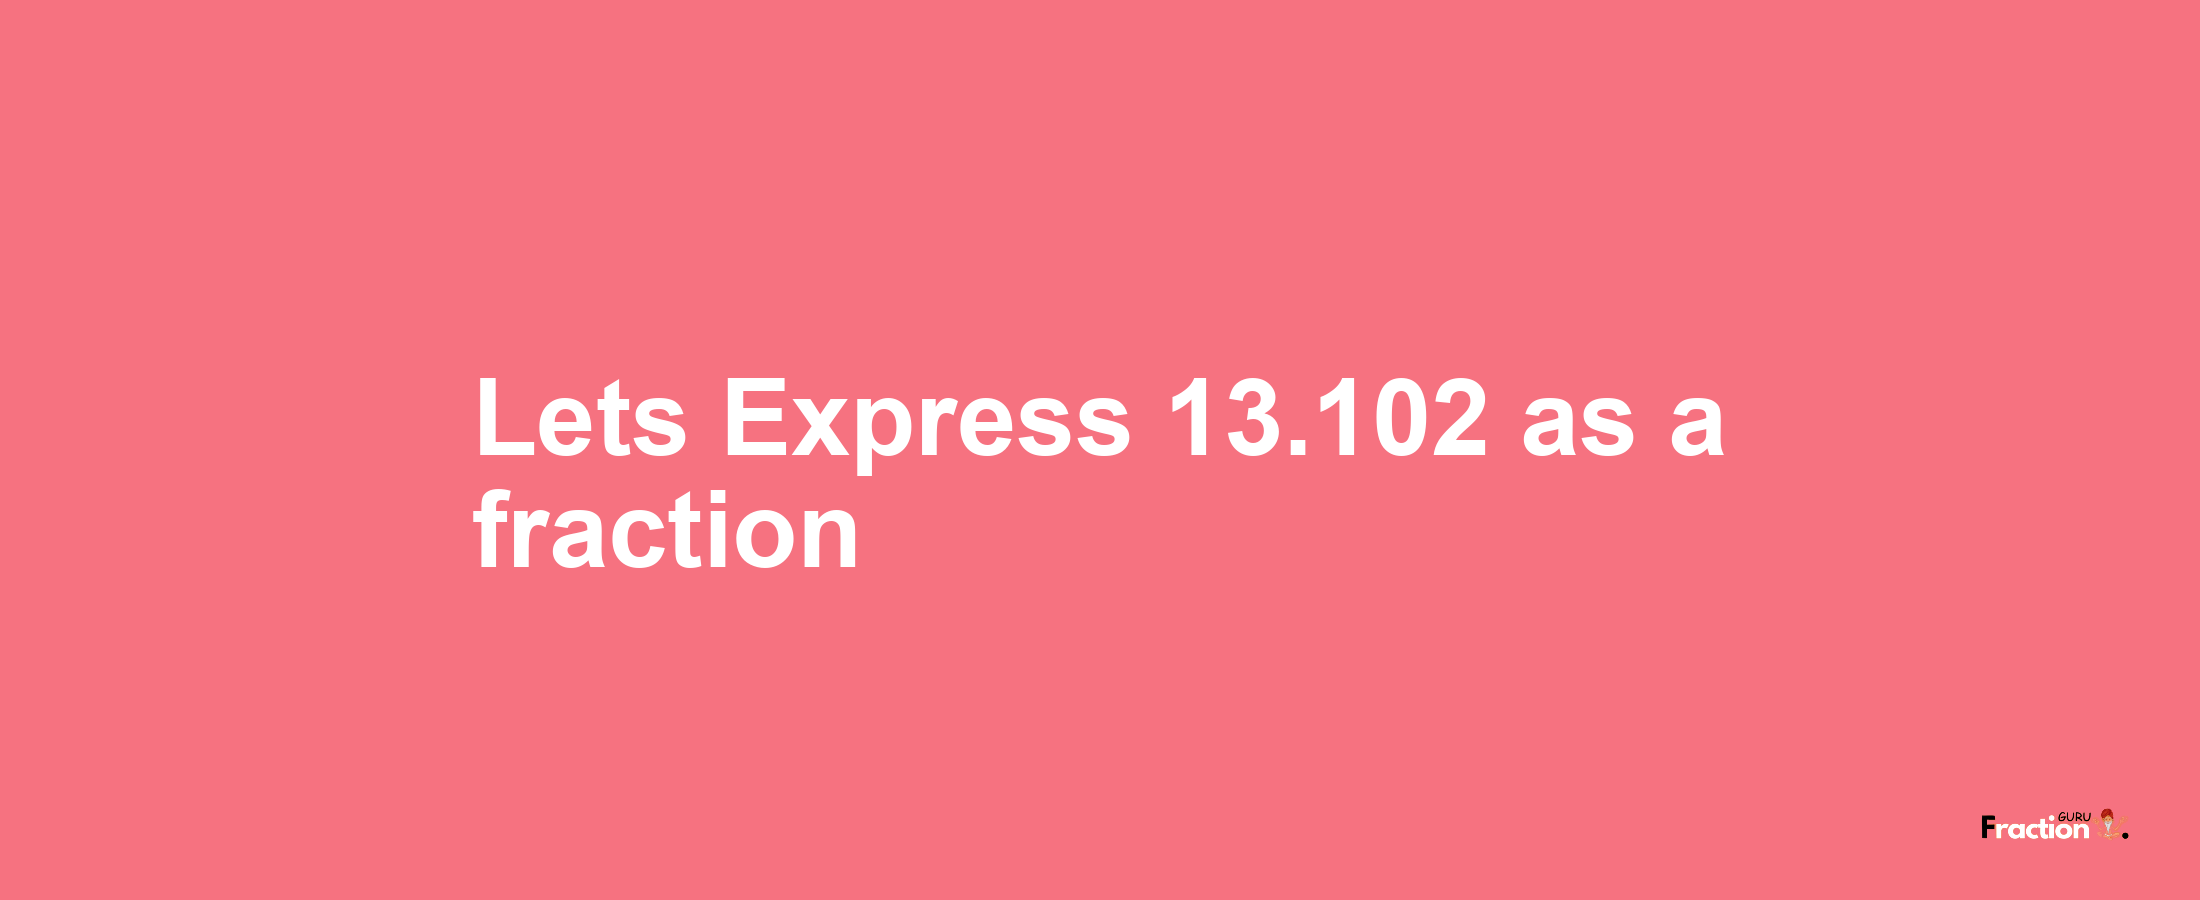 Lets Express 13.102 as afraction